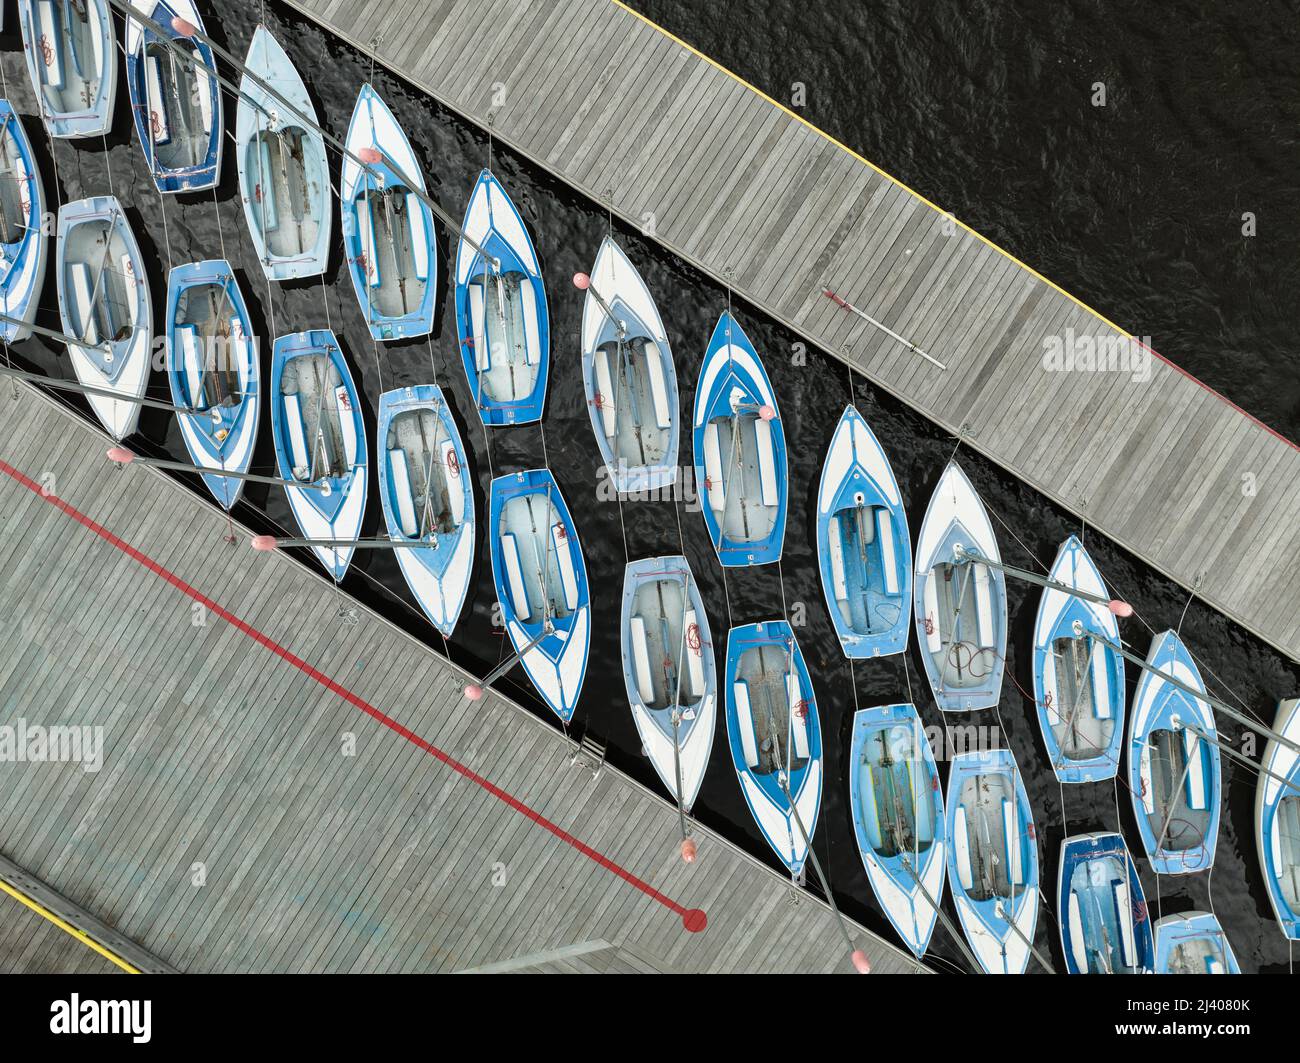 Rows of blue and white sailboats docked near the Charles river in Boston aerial view Stock Photo